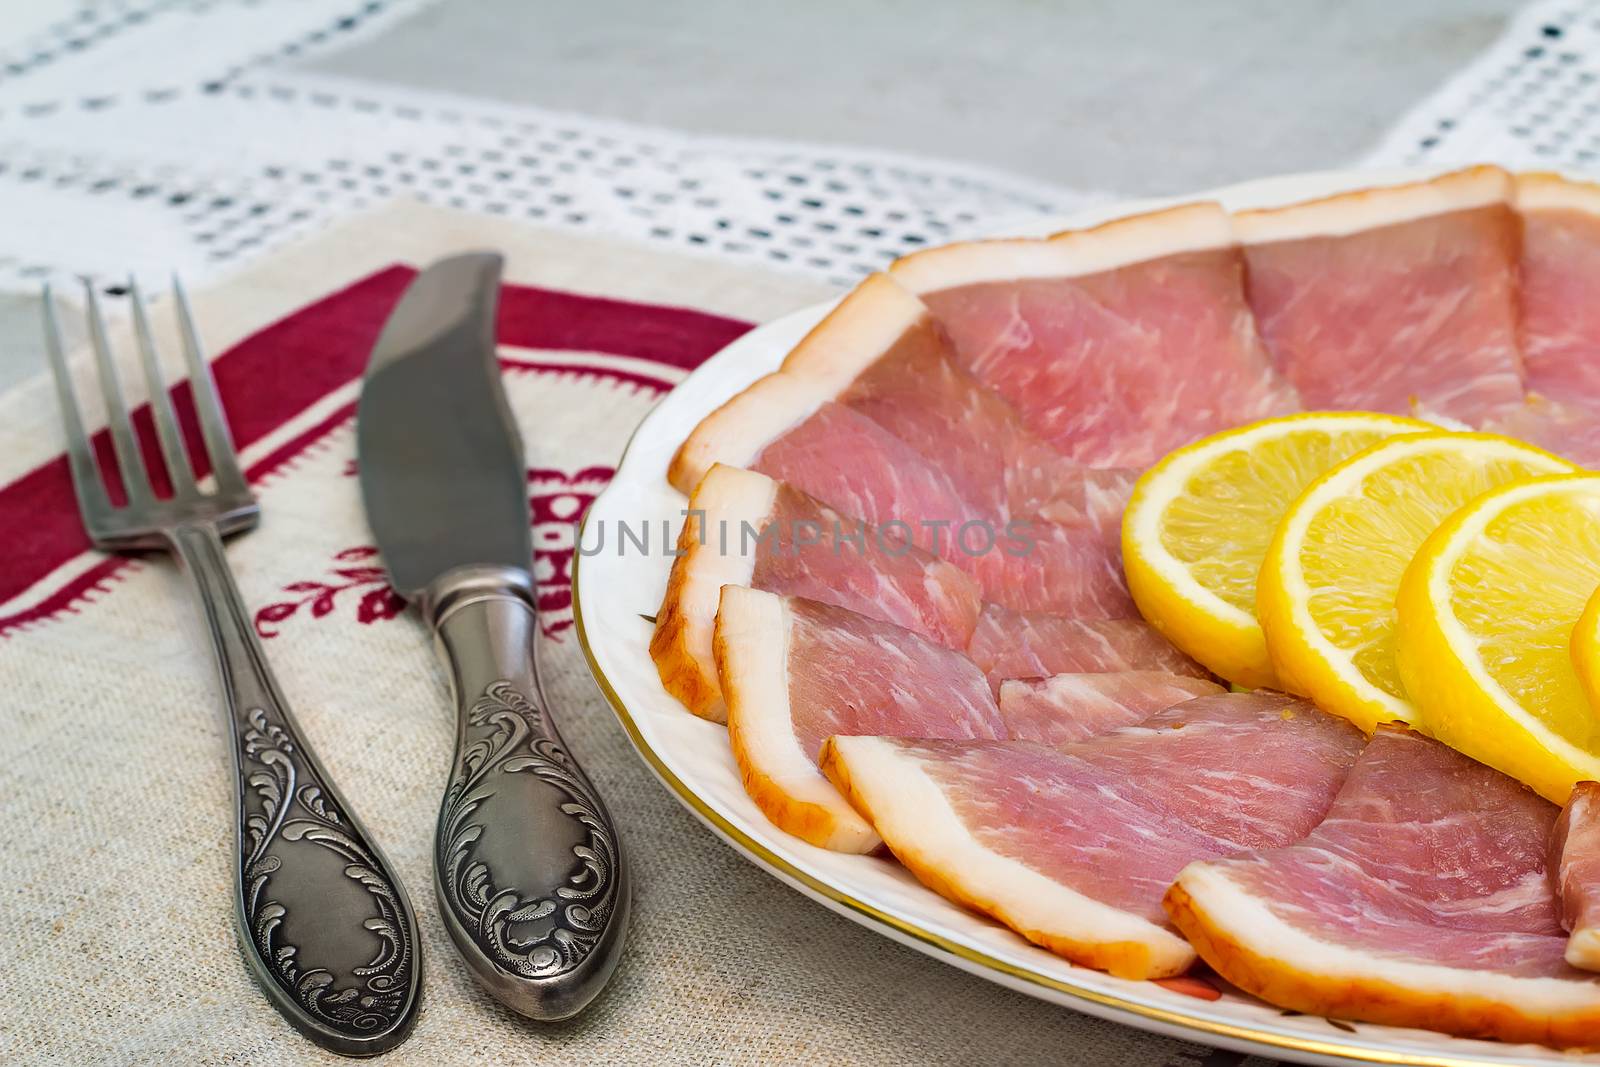 The dish with slices of ham and lemon  by georgina198